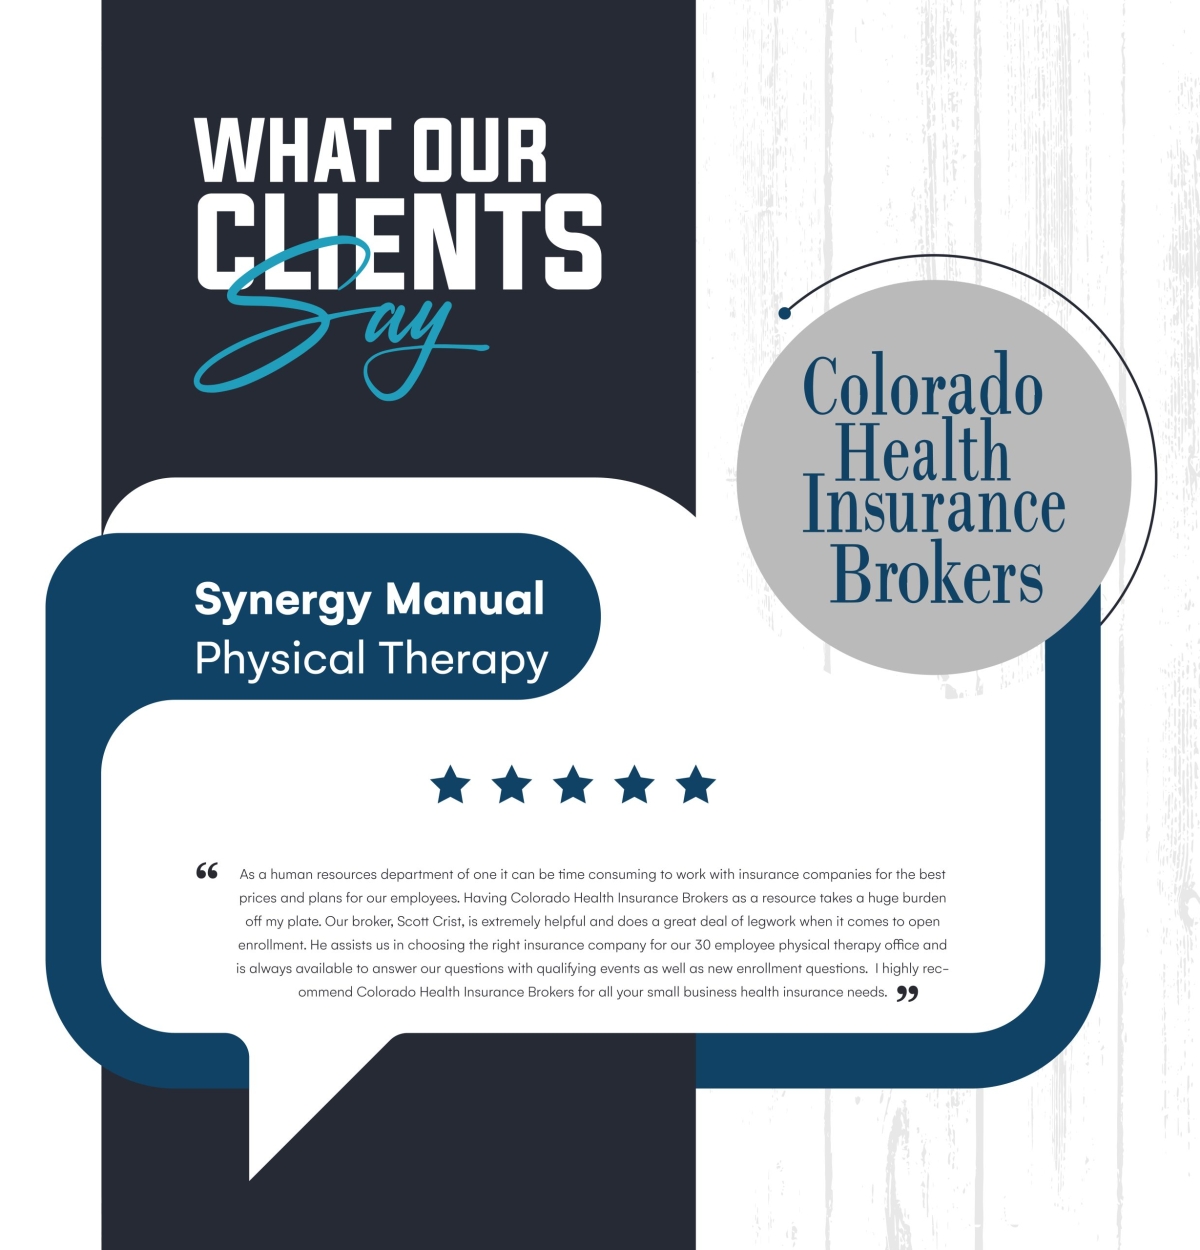 Synergy Manual Physical Therapy